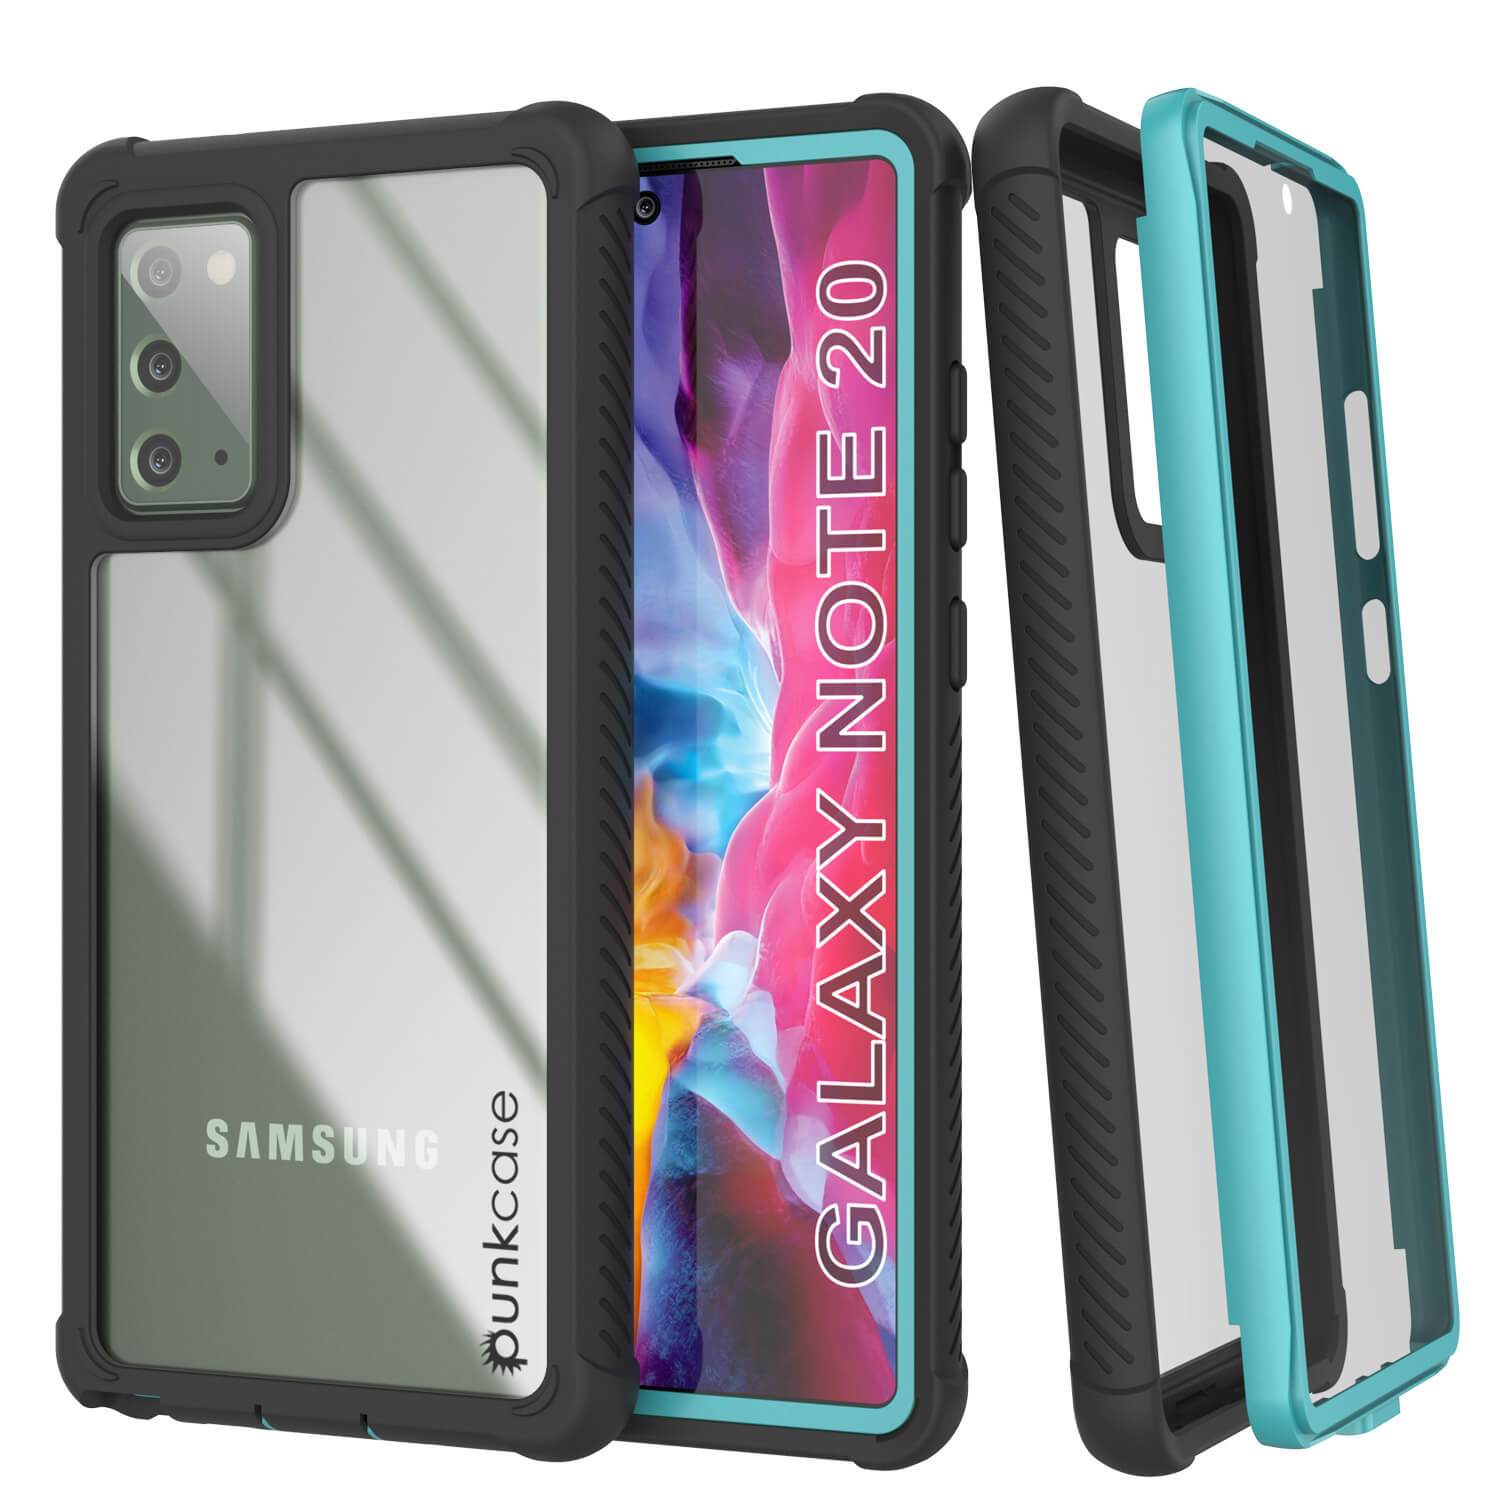 Punkcase Galaxy Note 20 Case, [Spartan Series] Teal Rugged Heavy Duty Cover W/Built in Screen Protector